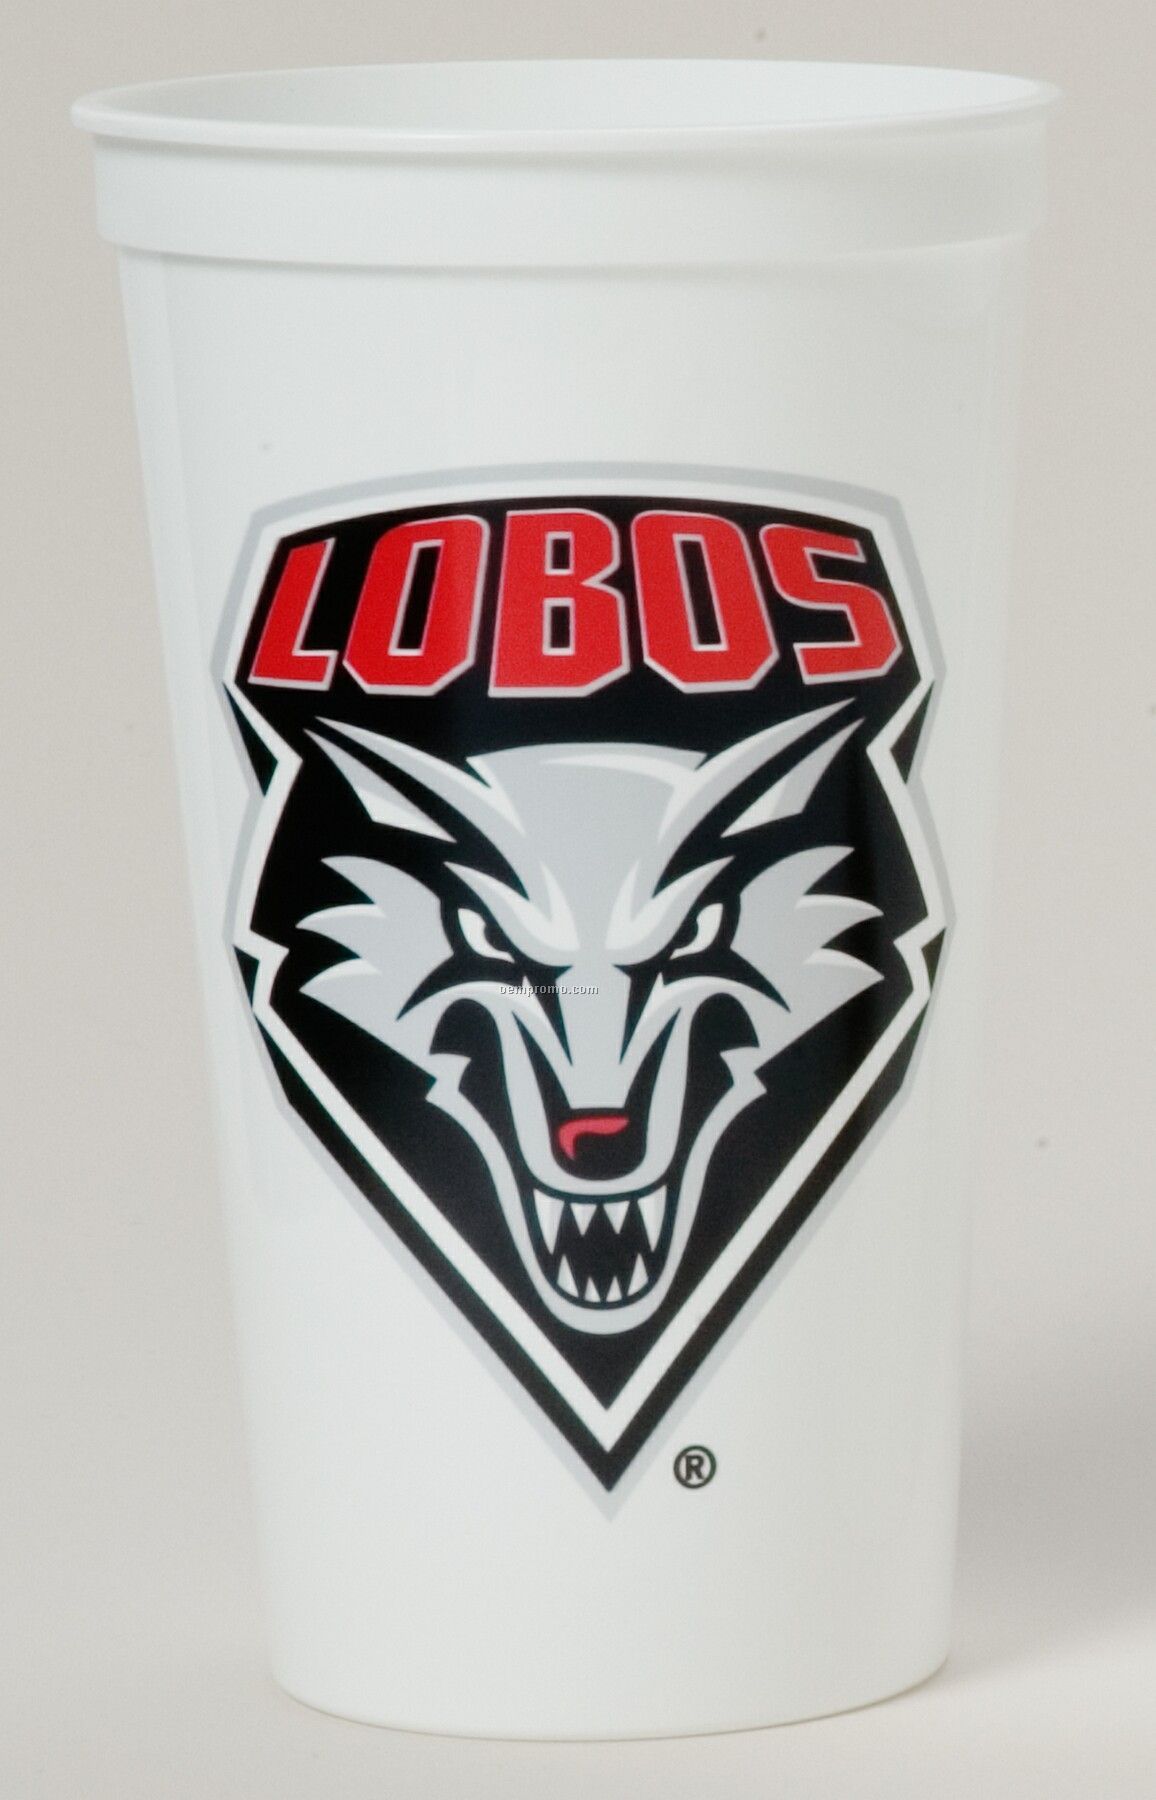 32 Oz. Smooth White Stadium Cup (7 Color Offset Imprint)